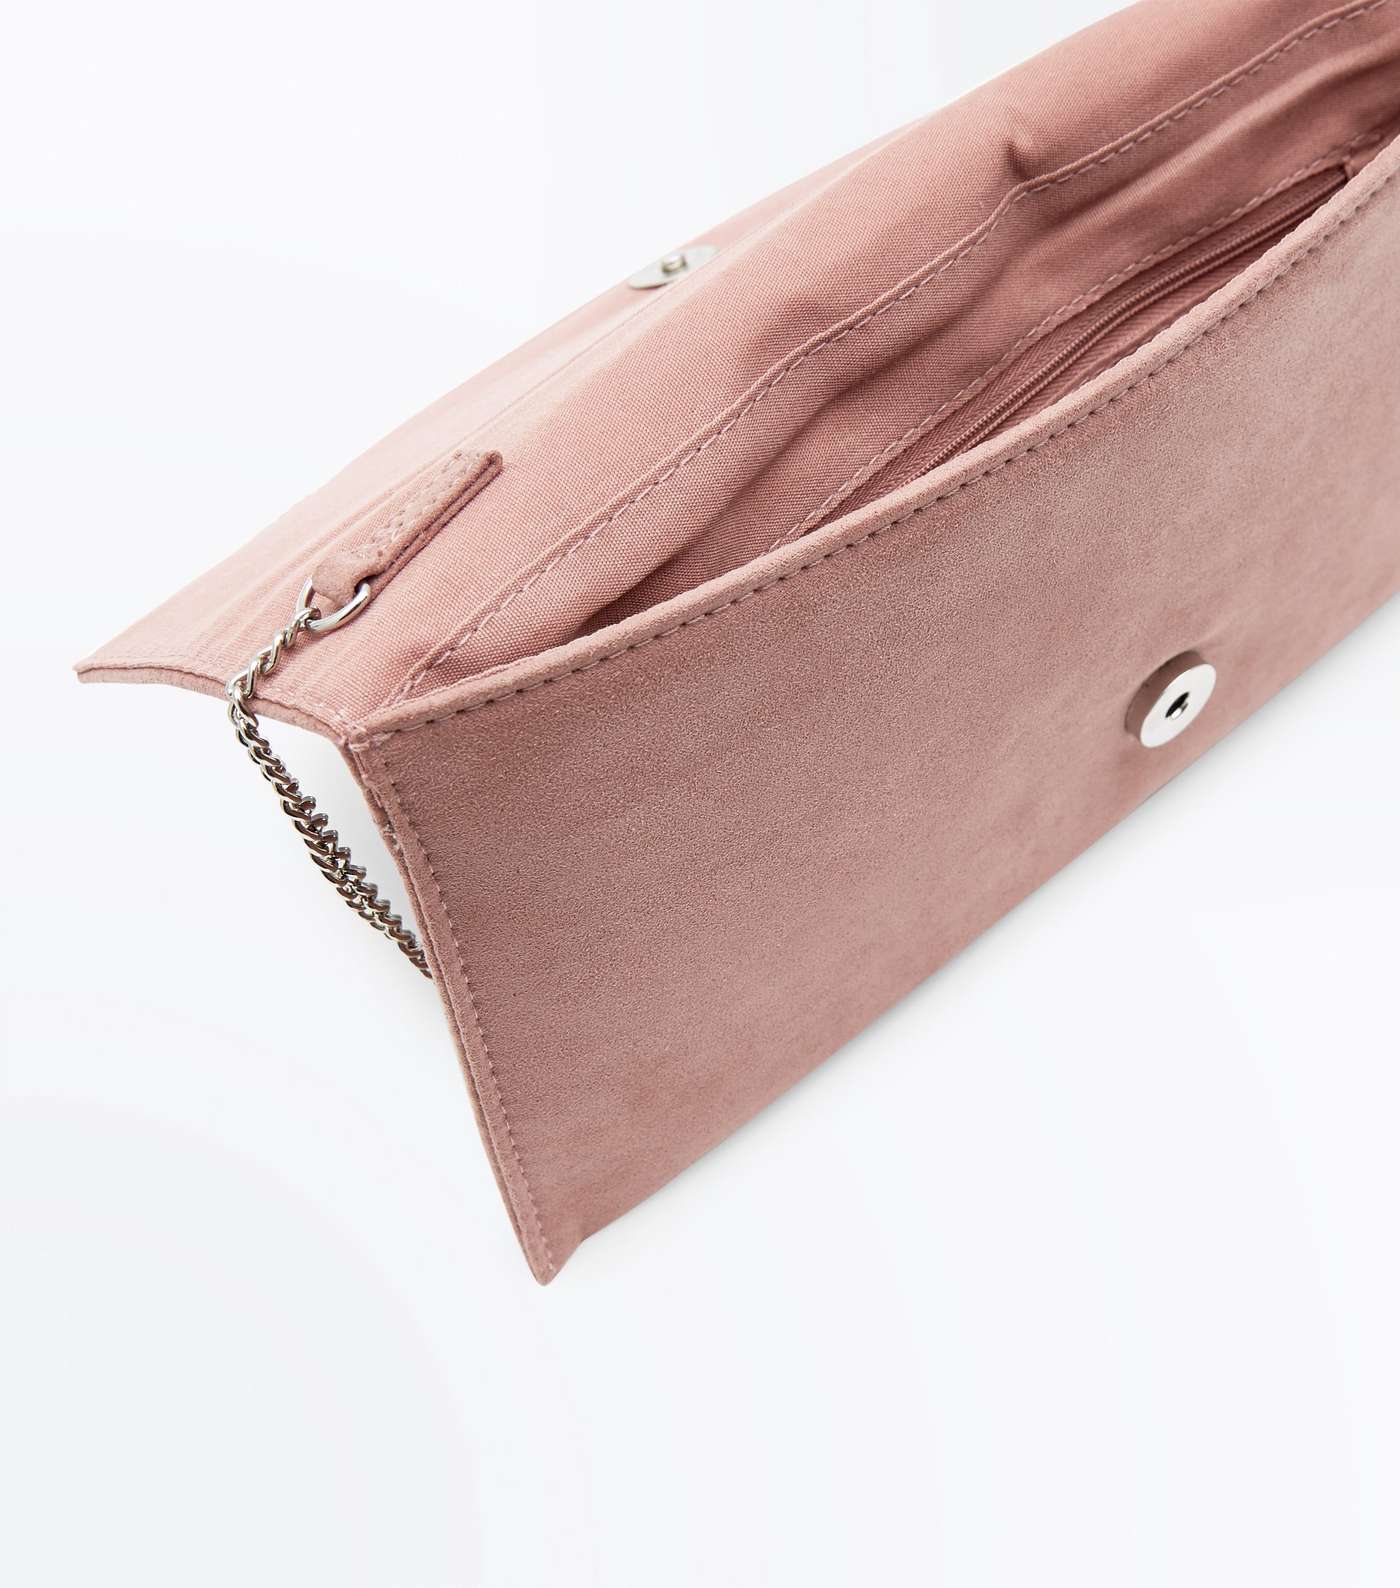 Nude Chain Strap Envelope Clutch Bag Image 6